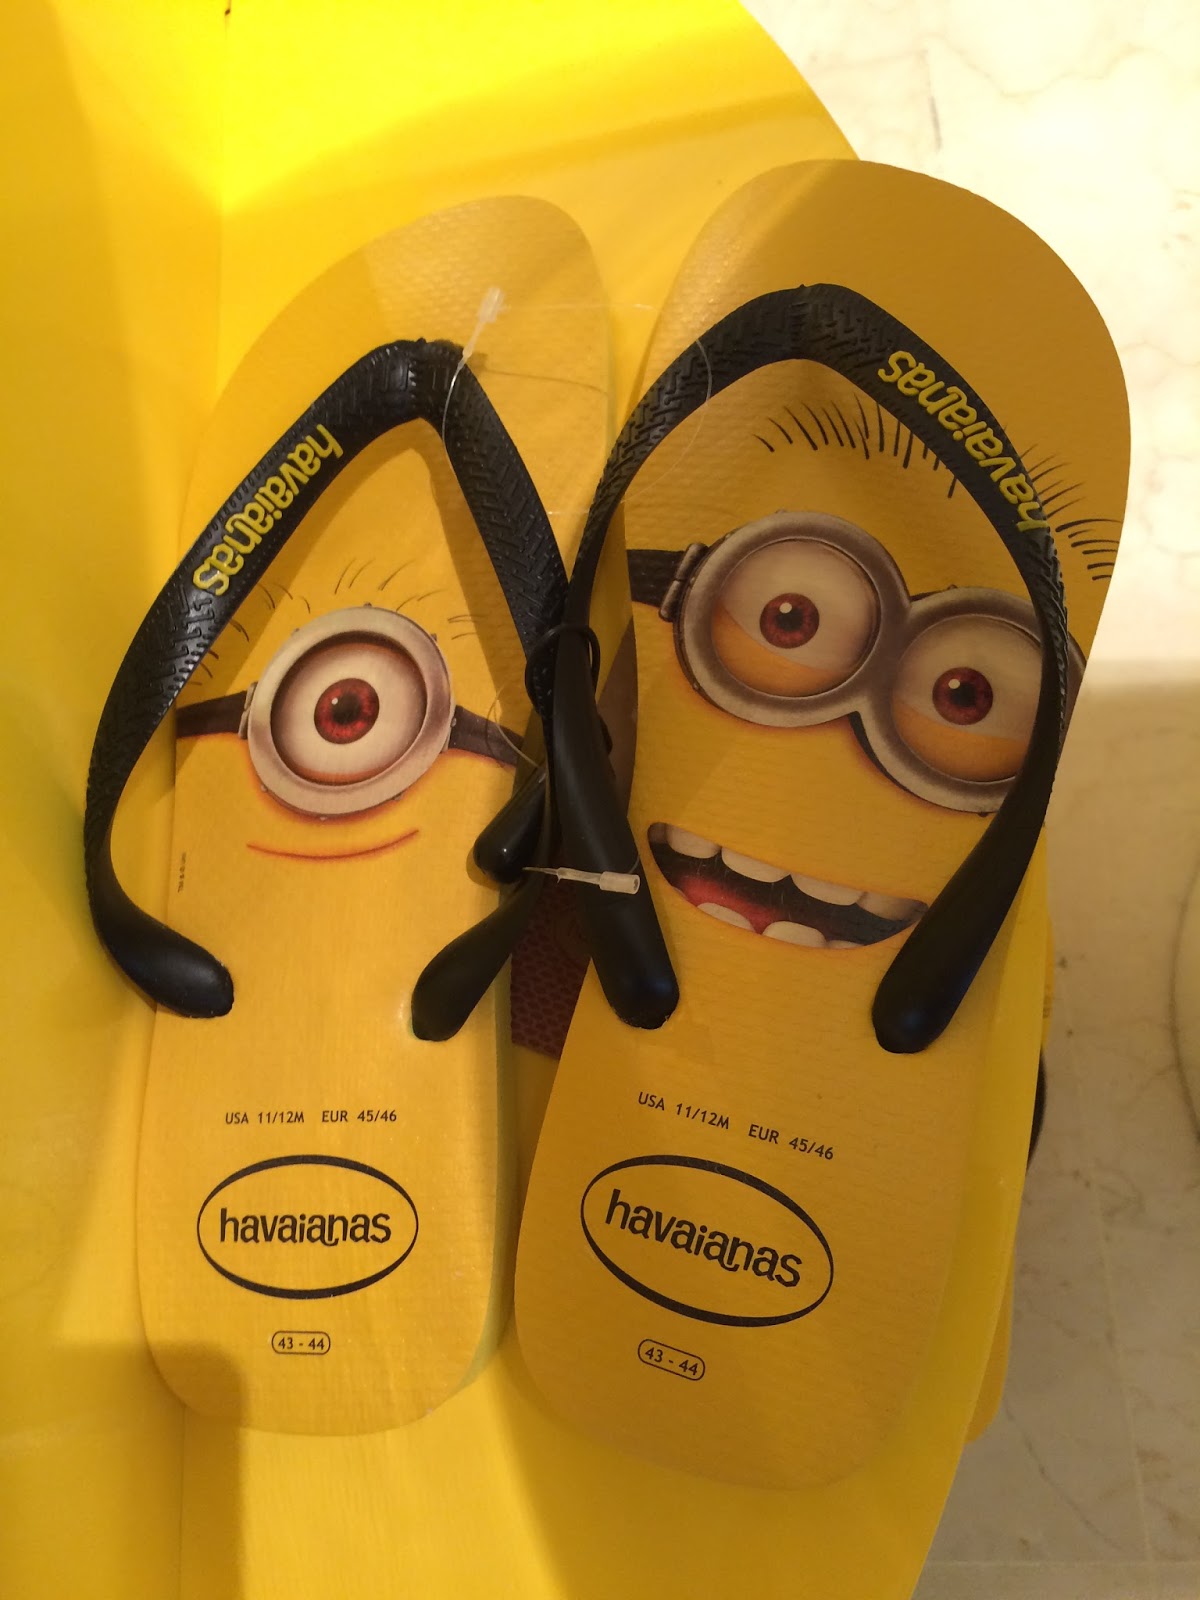 frumpy to funky: Minions 'Bello Yellow' Collection comes to Selfridges